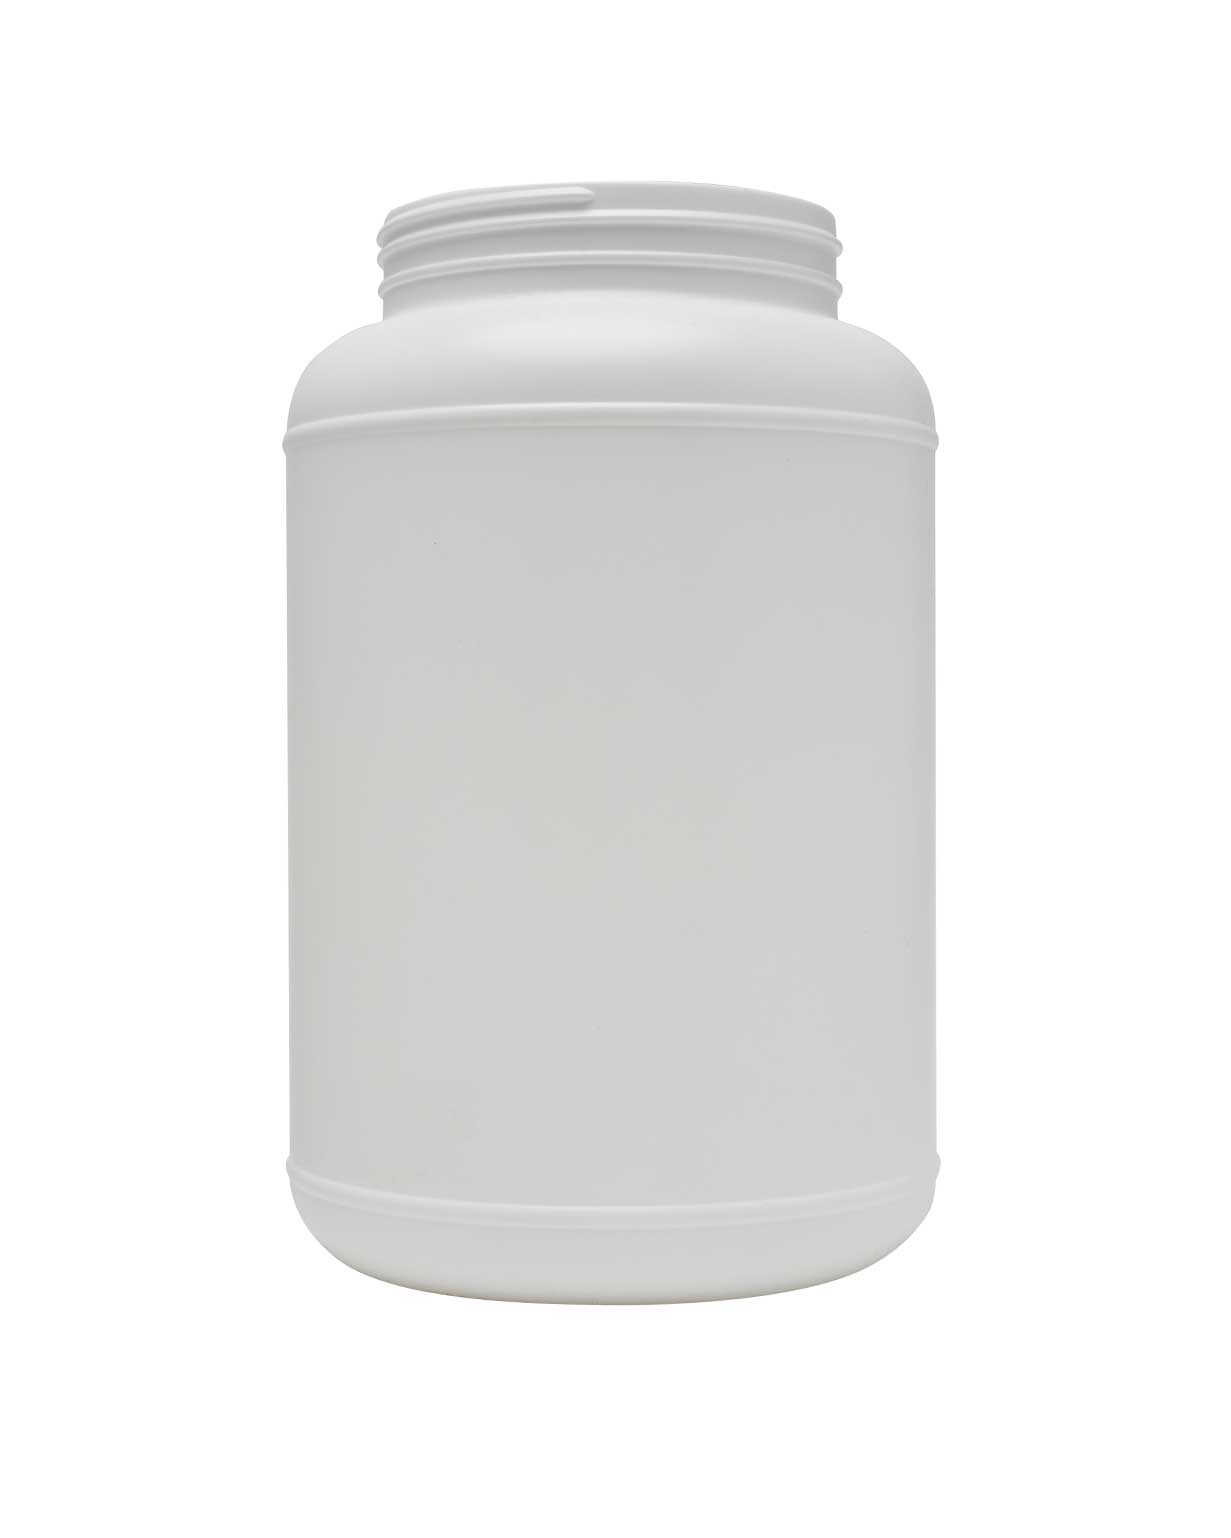 3785 cc hdpe white label panel wide mouth jar 110-400